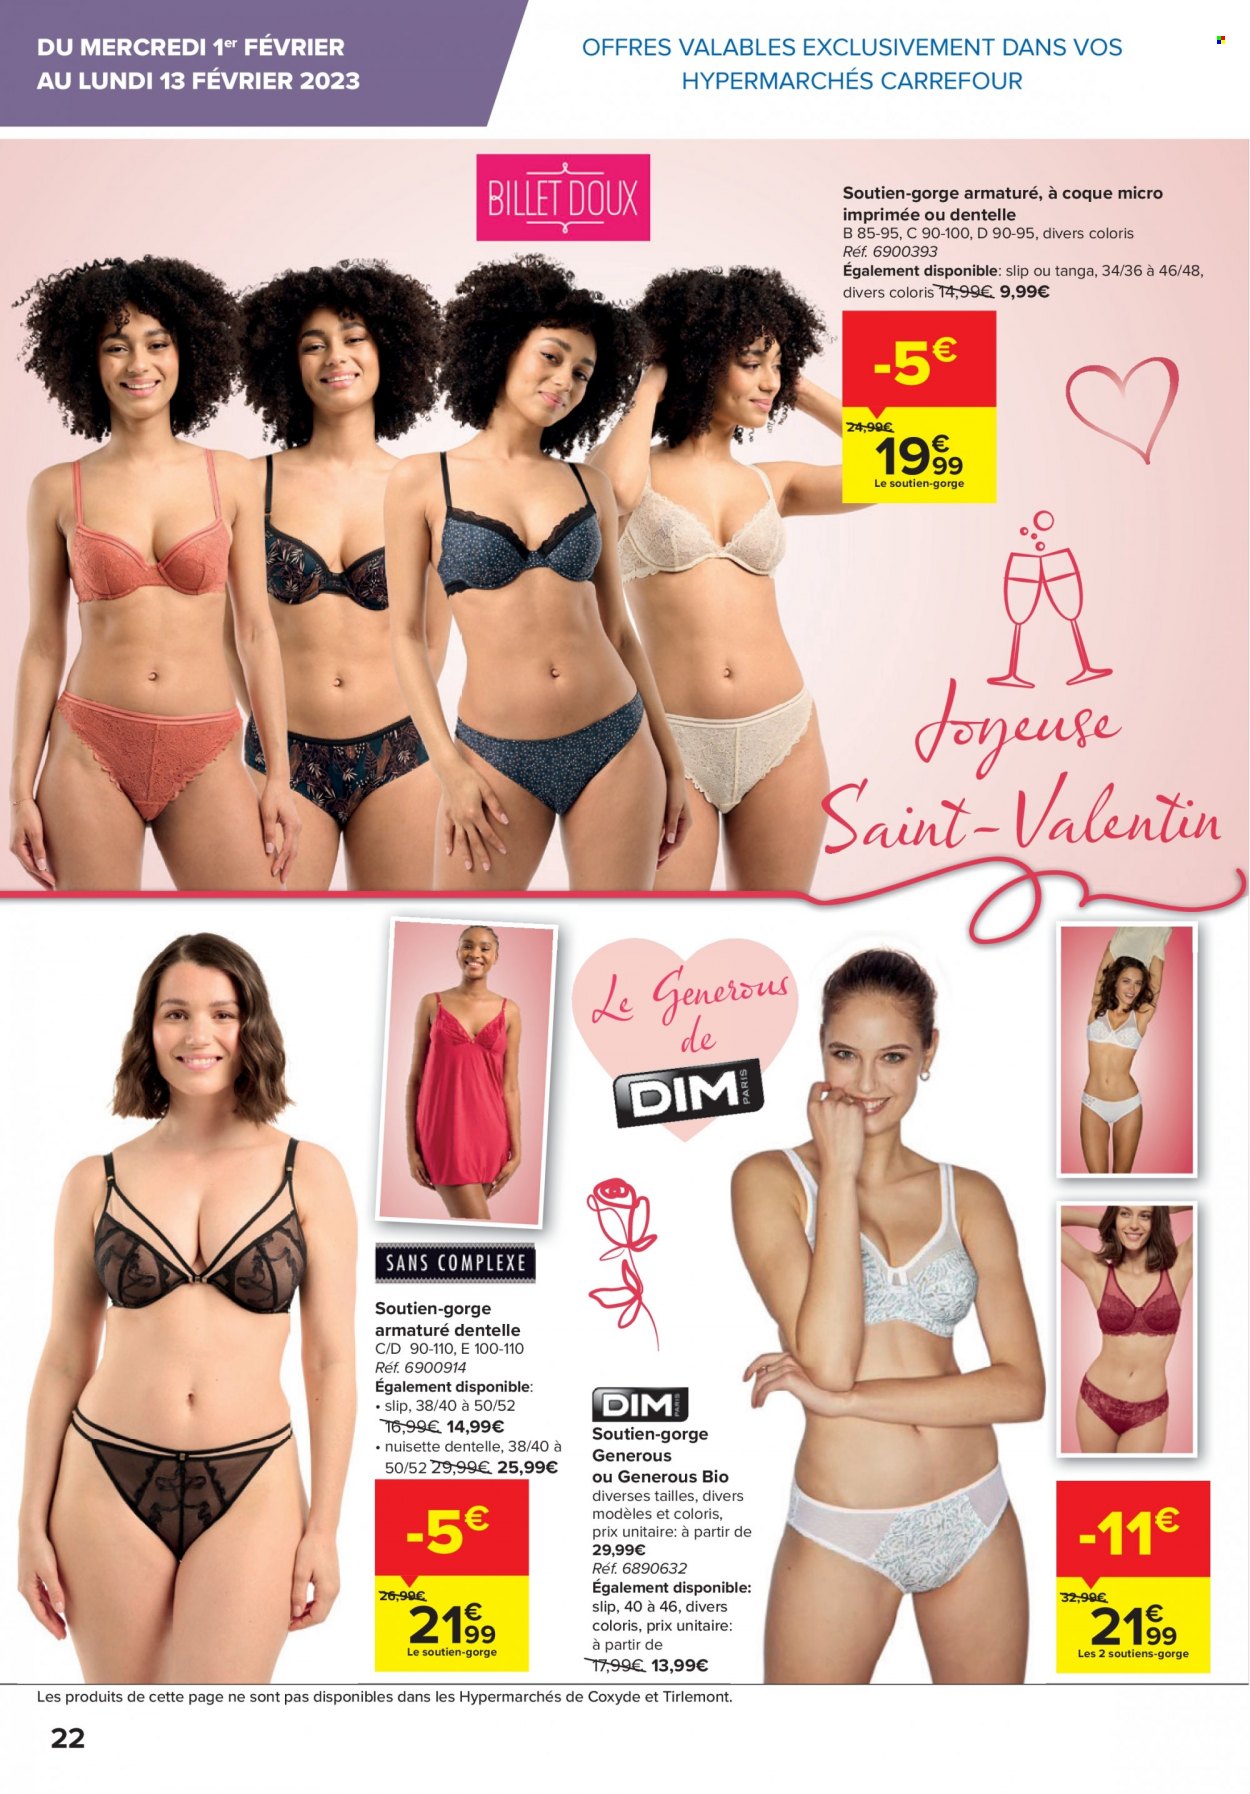 Catalogue Carrefour hypermarkt - 1.2.2023 - 13.2.2023. Page 22.